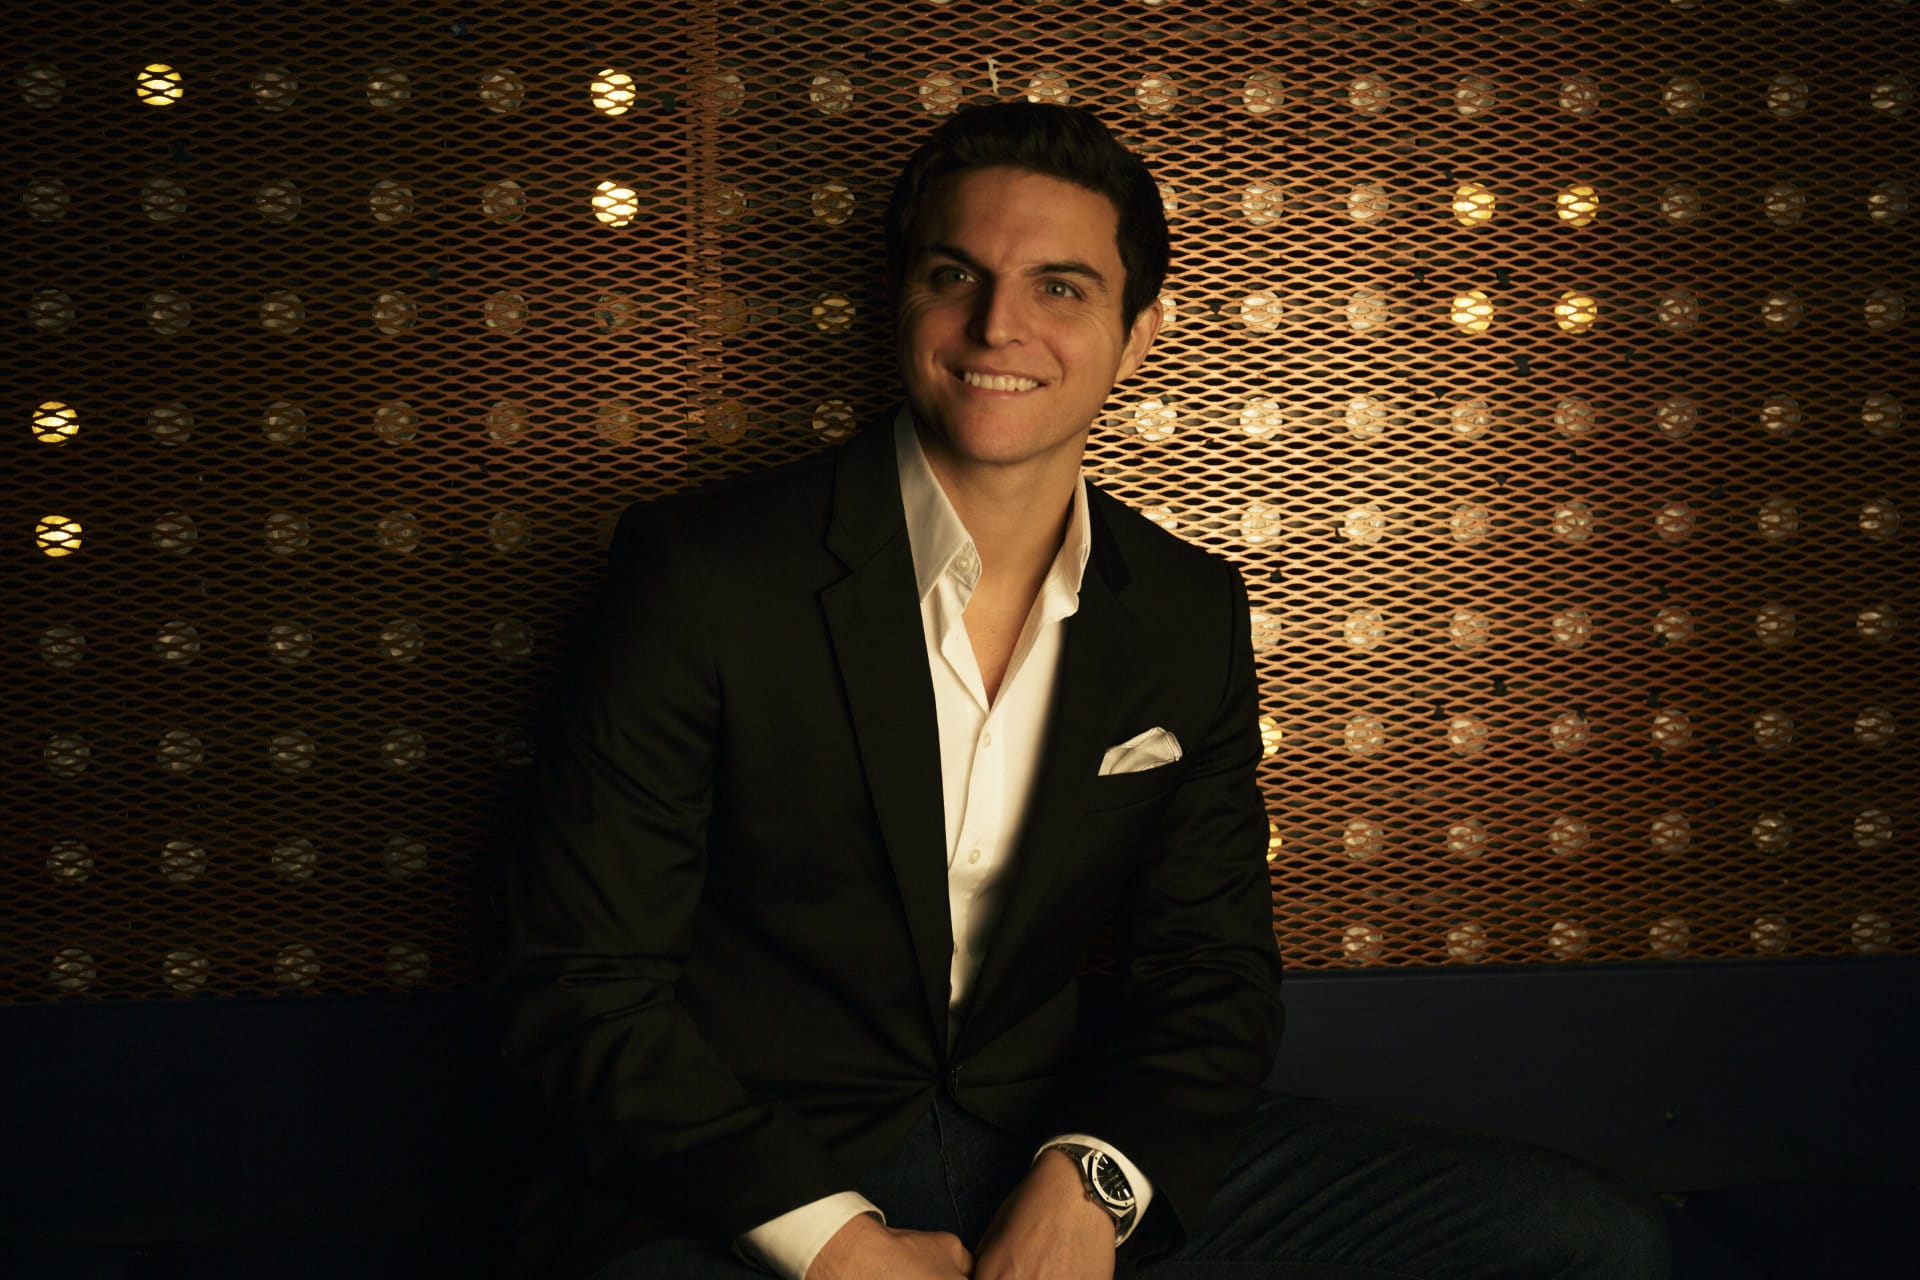 Asher Grant is a successful young entrepreneur and CEO of trendy nightclub London REIGN.